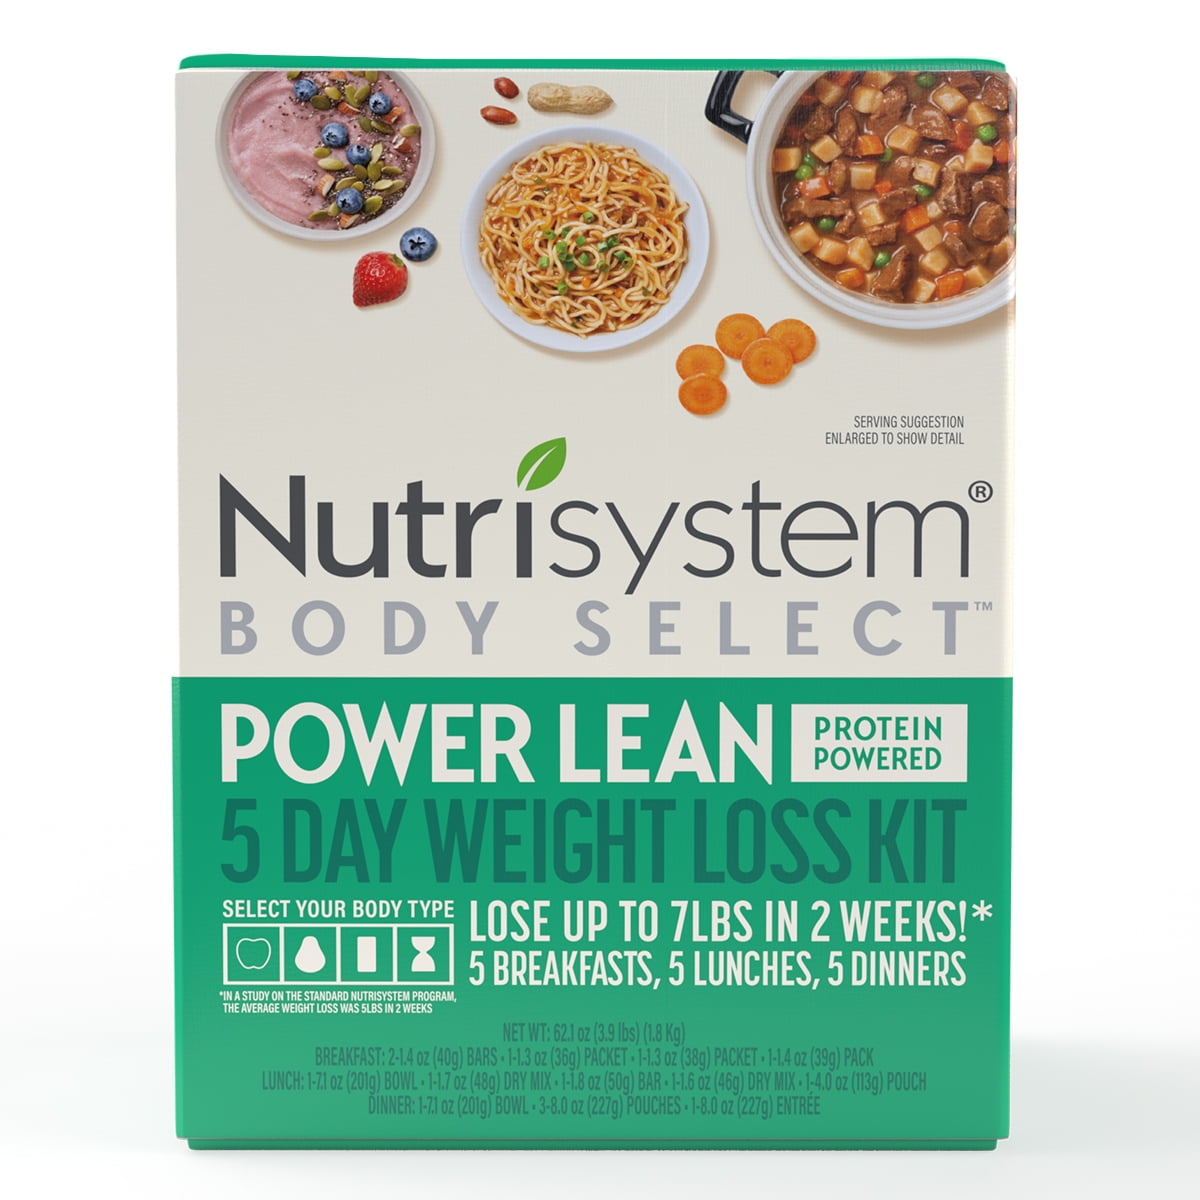 Nutrisystem Shakes: Healthy Weight Loss at Home? - Ms. Career Girl